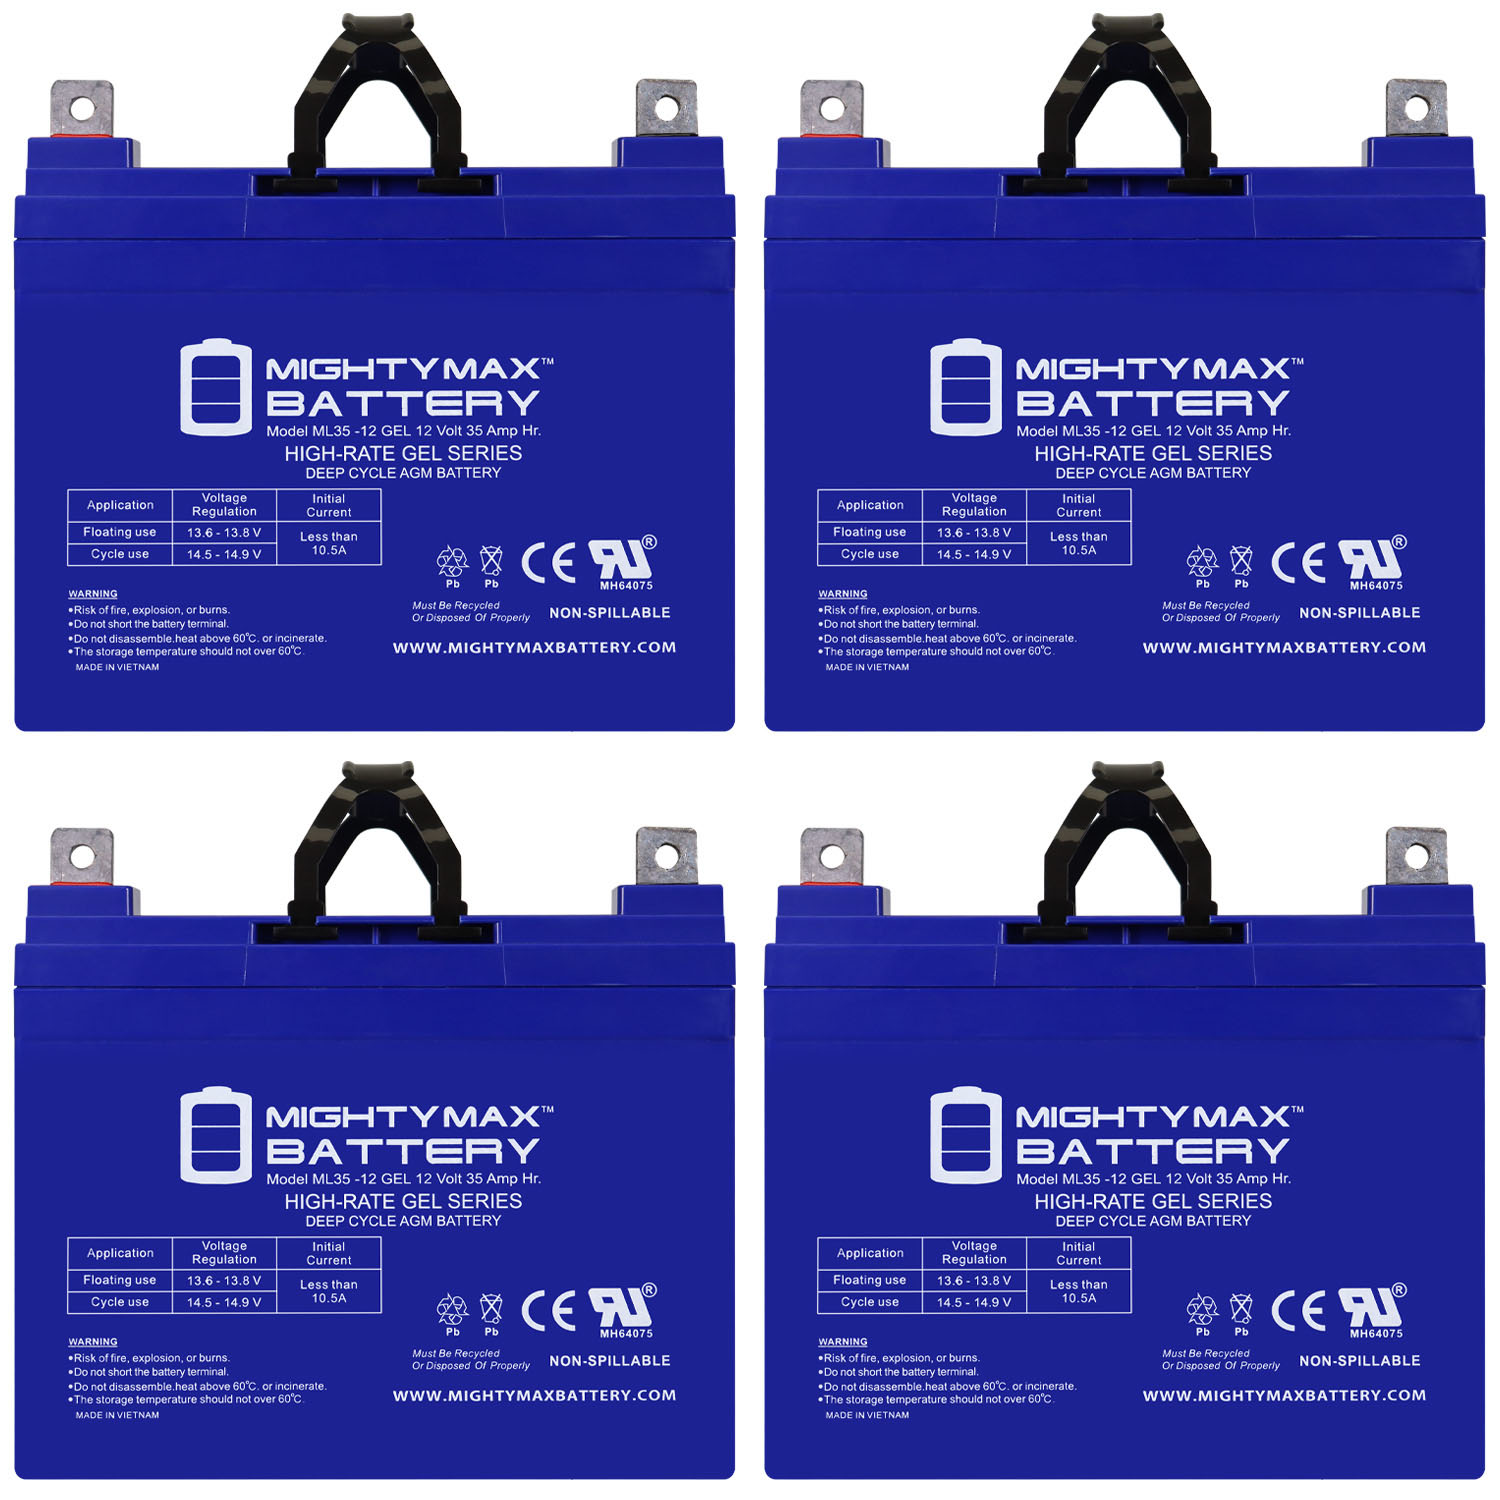 12V 35AH GEL NB Replacement Battery Compatible with NP38-12 U1-34 UB12350 - 4 Pack